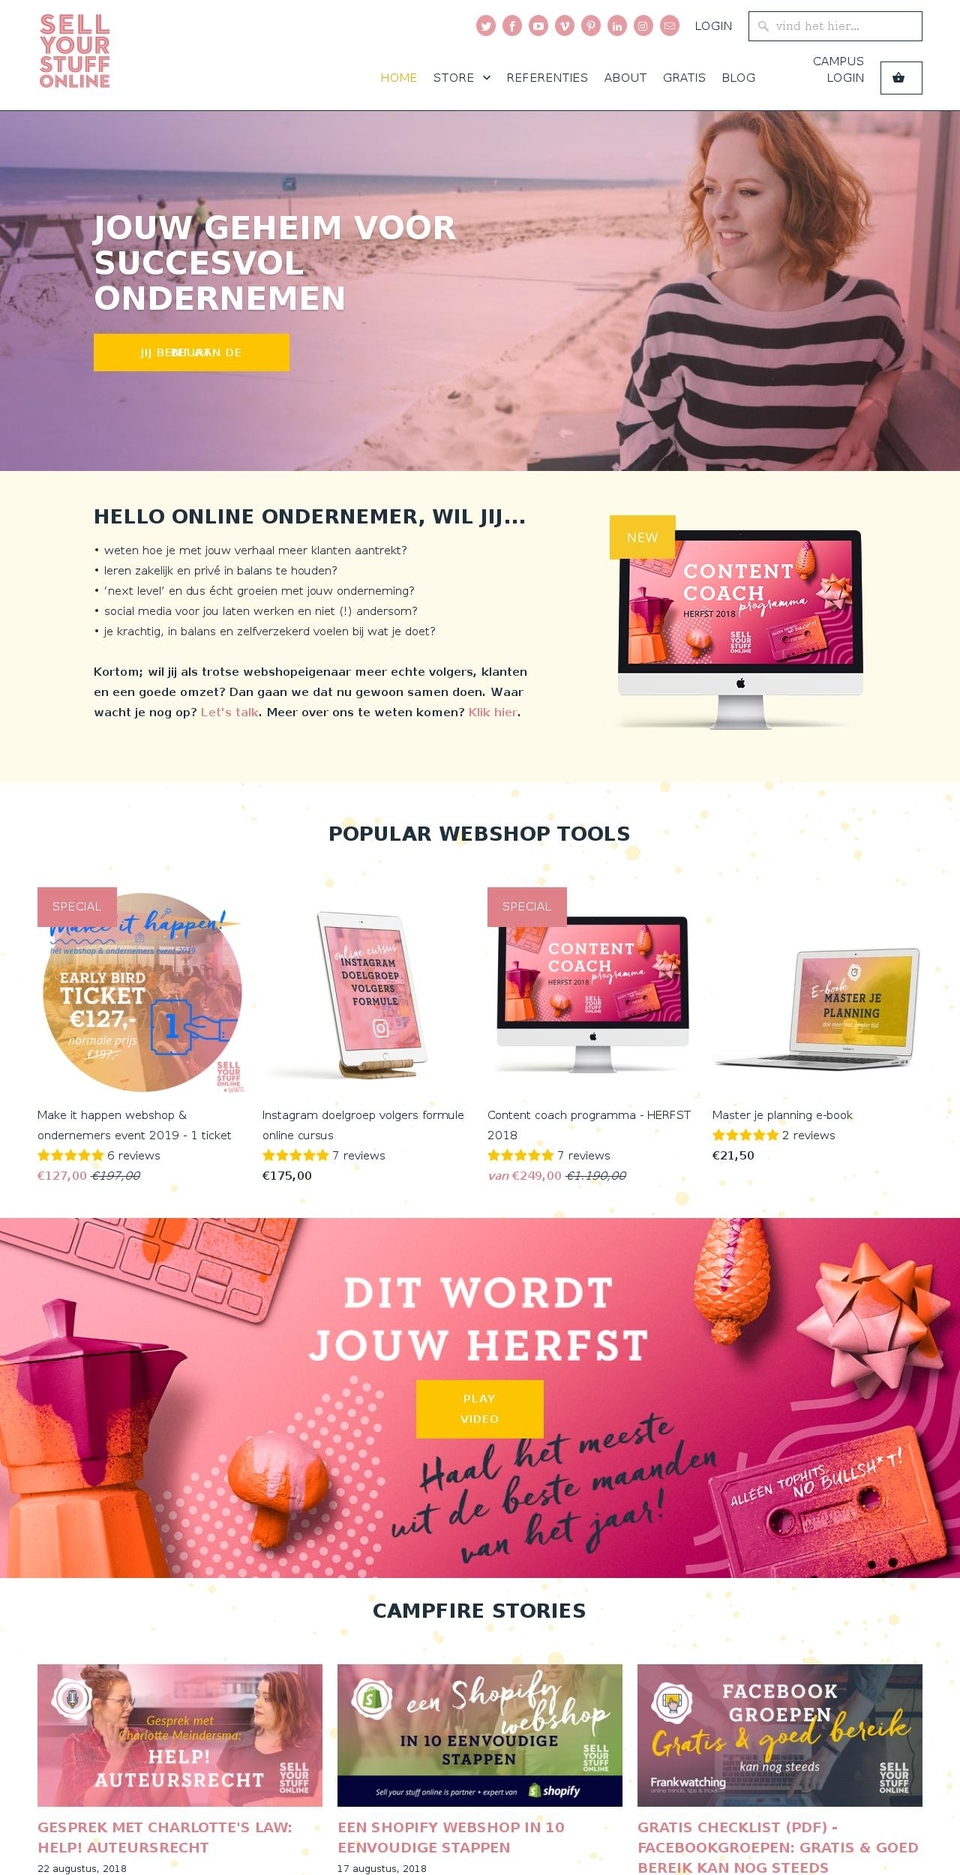 Minion Shopify theme site example sellyourstuffonline.nl